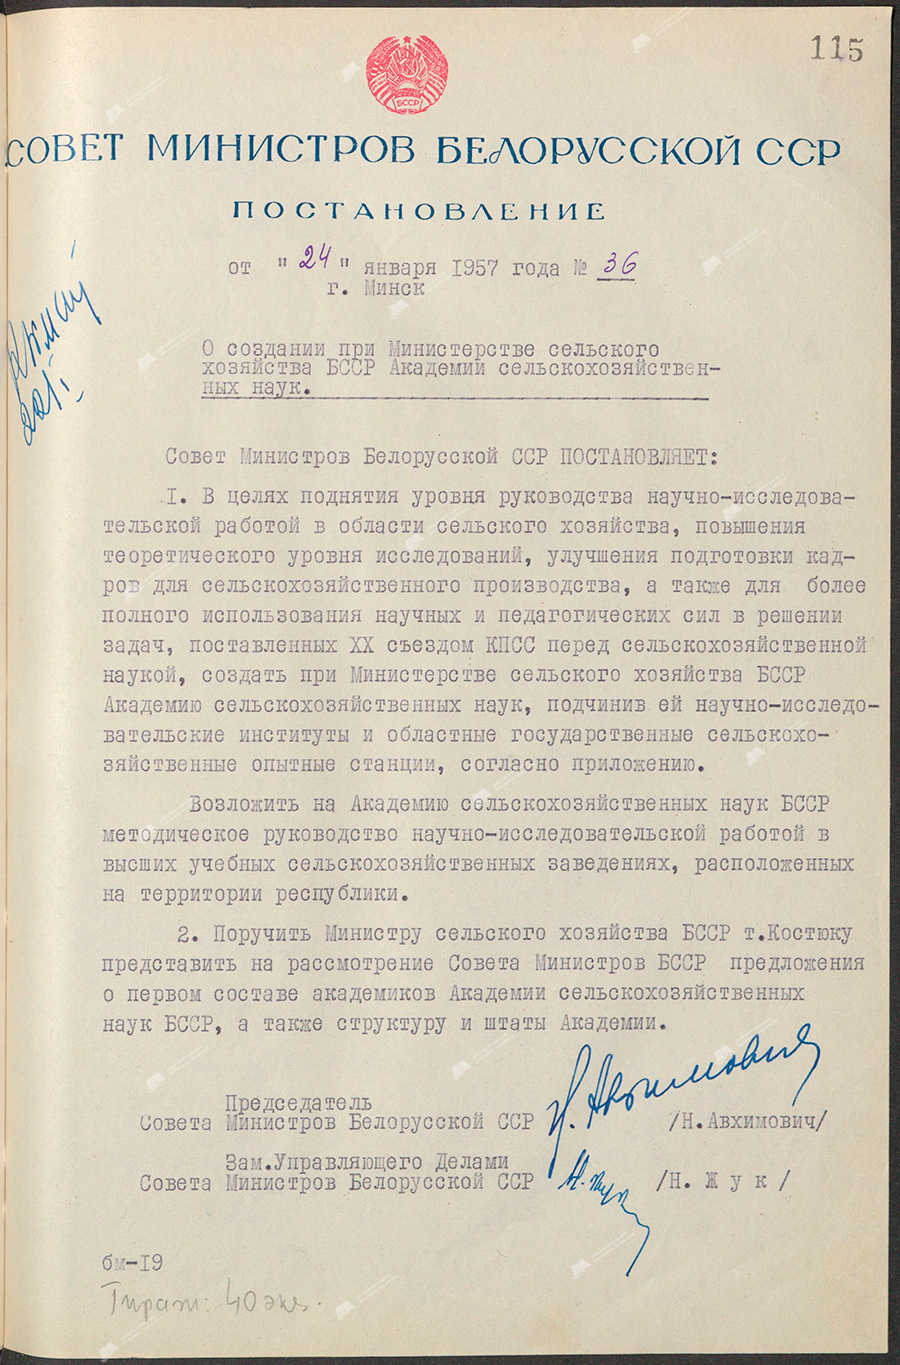 Resolution No. 36 of the Council of Ministers of the Byelorussian SSR «On the creation of the Academy of Agricultural Sciences under the Ministry of Agriculture of the BSSR»-стр. 0